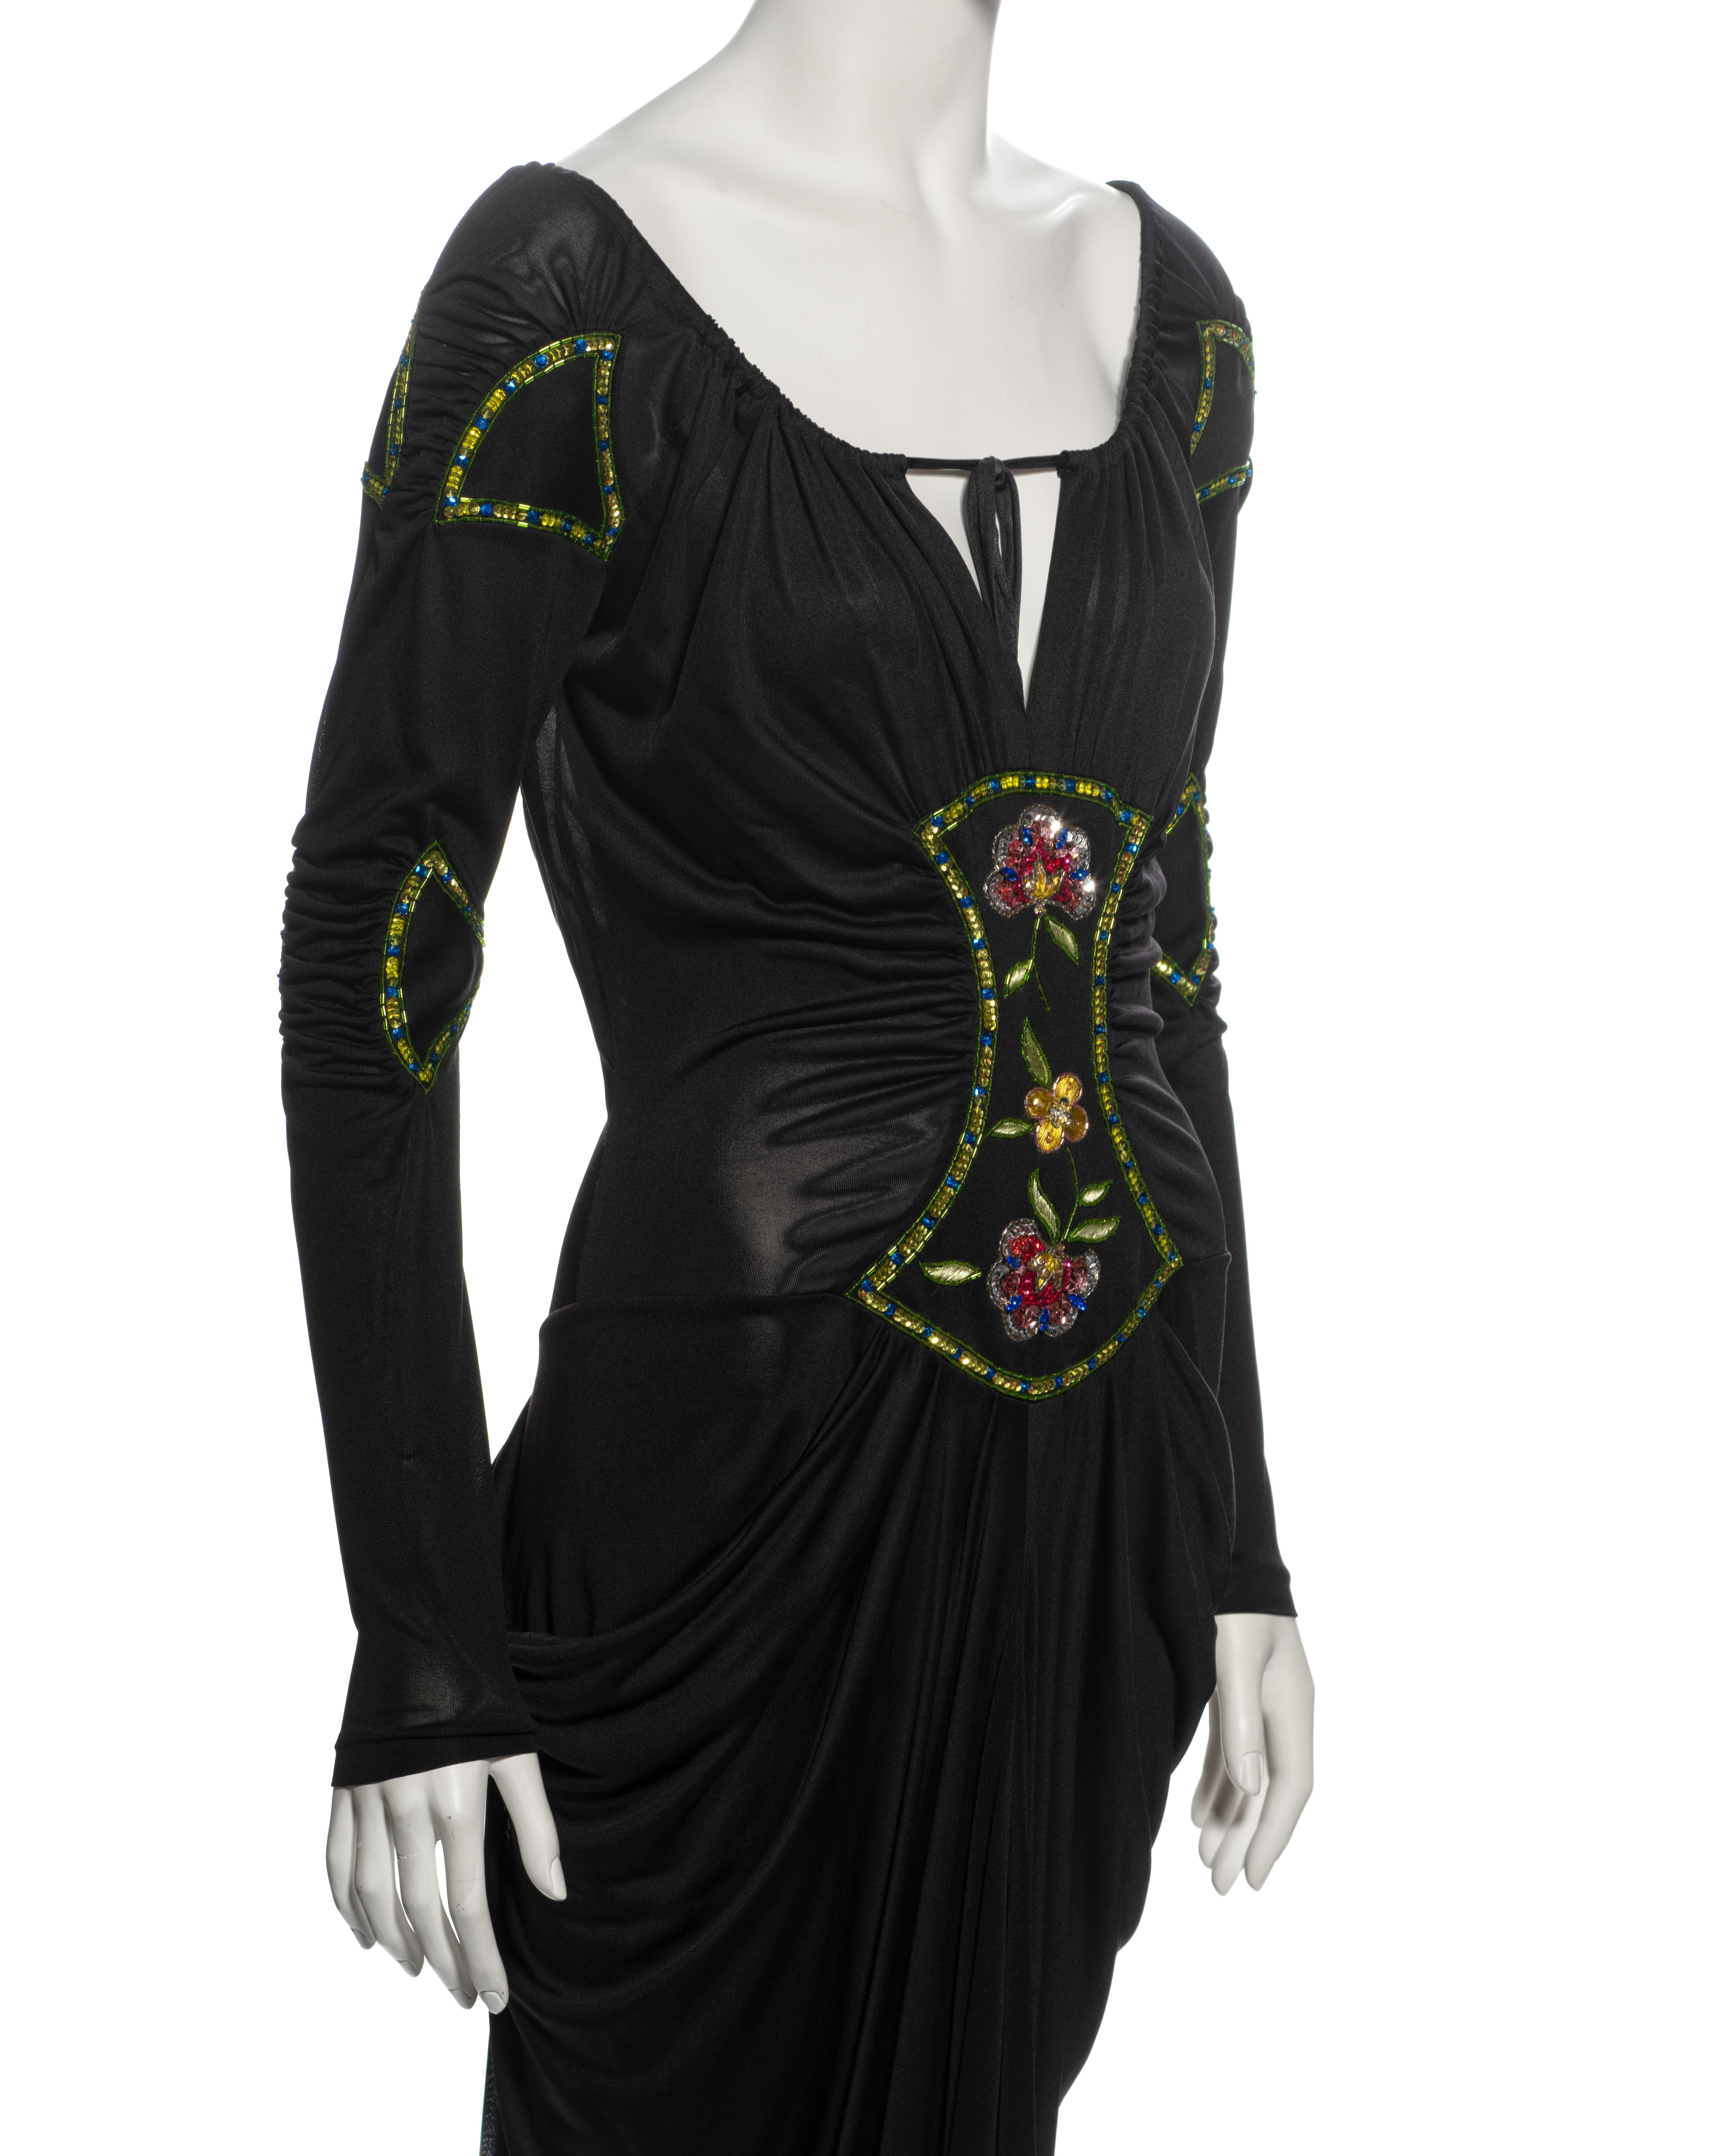 Christian Dior by John Galliano Black Viscose Embellished Draped Dress, ss 2002 For Sale 5